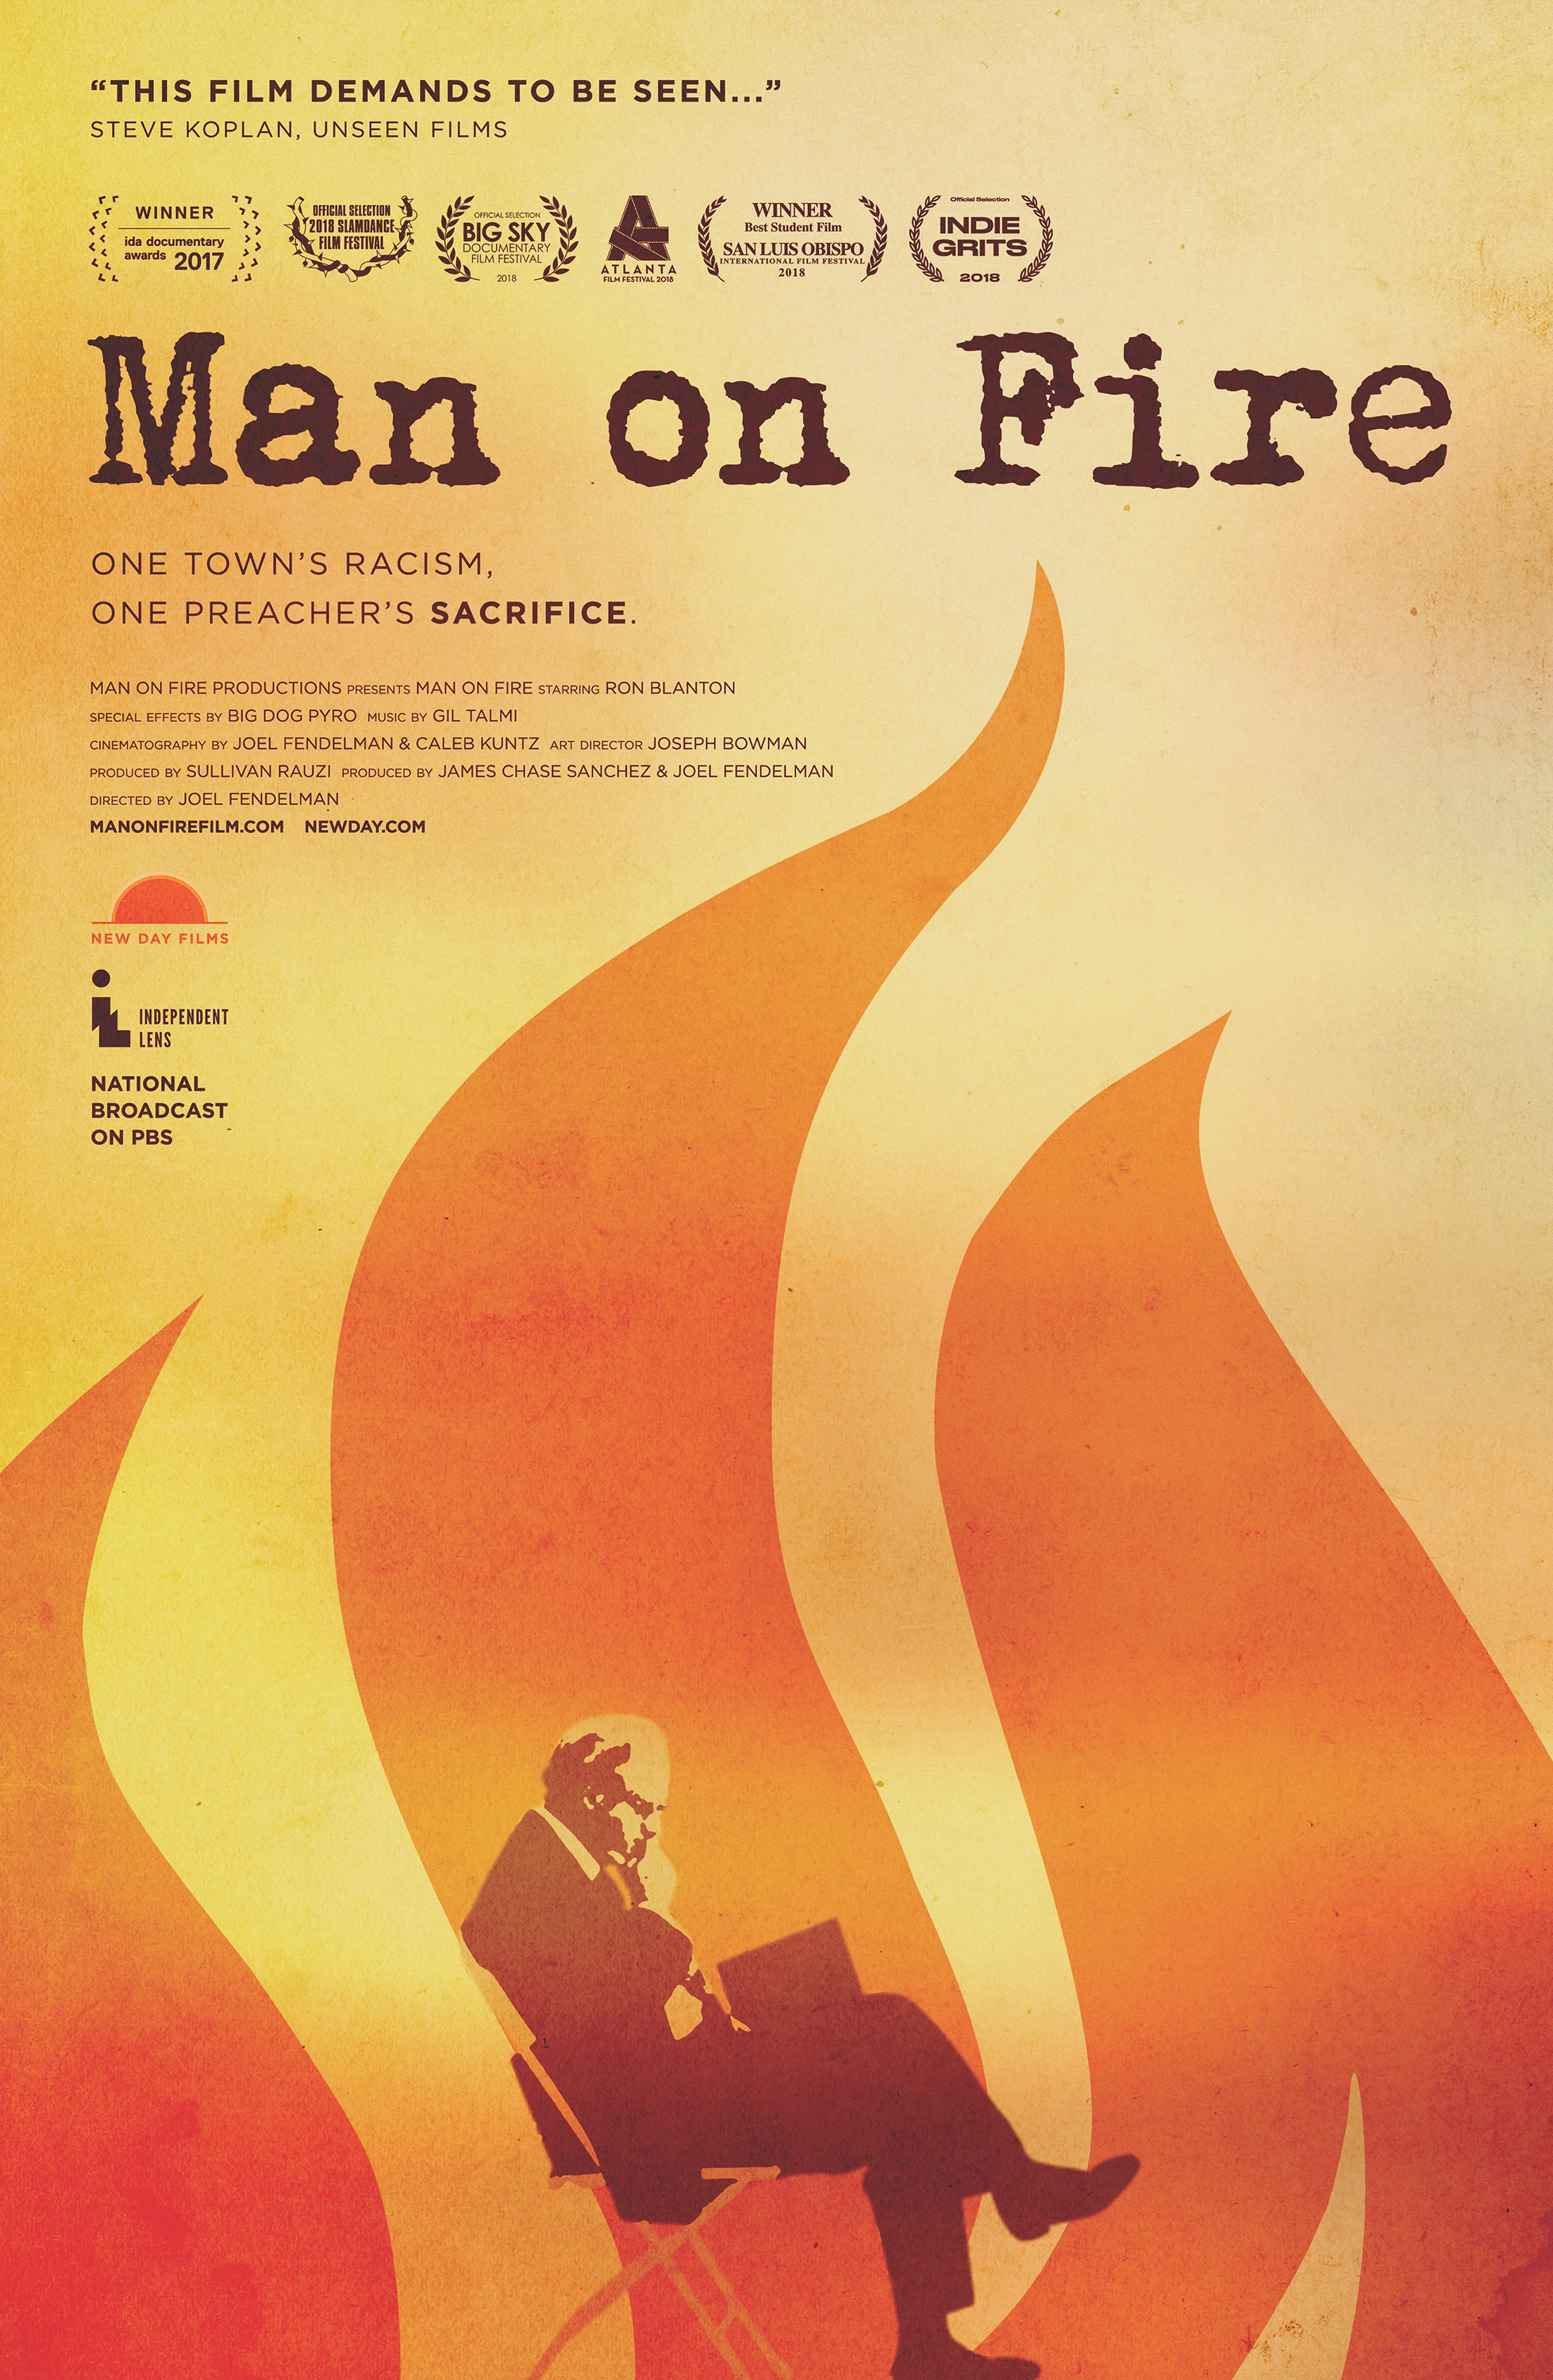 A poster for “Man on Fire,” a documentary that examines the 2014 self-immolation of retired United Methodist clergyman Charles Moore, and its effect on his East Texas hometown. Image courtesy of “Man on Fire” film.